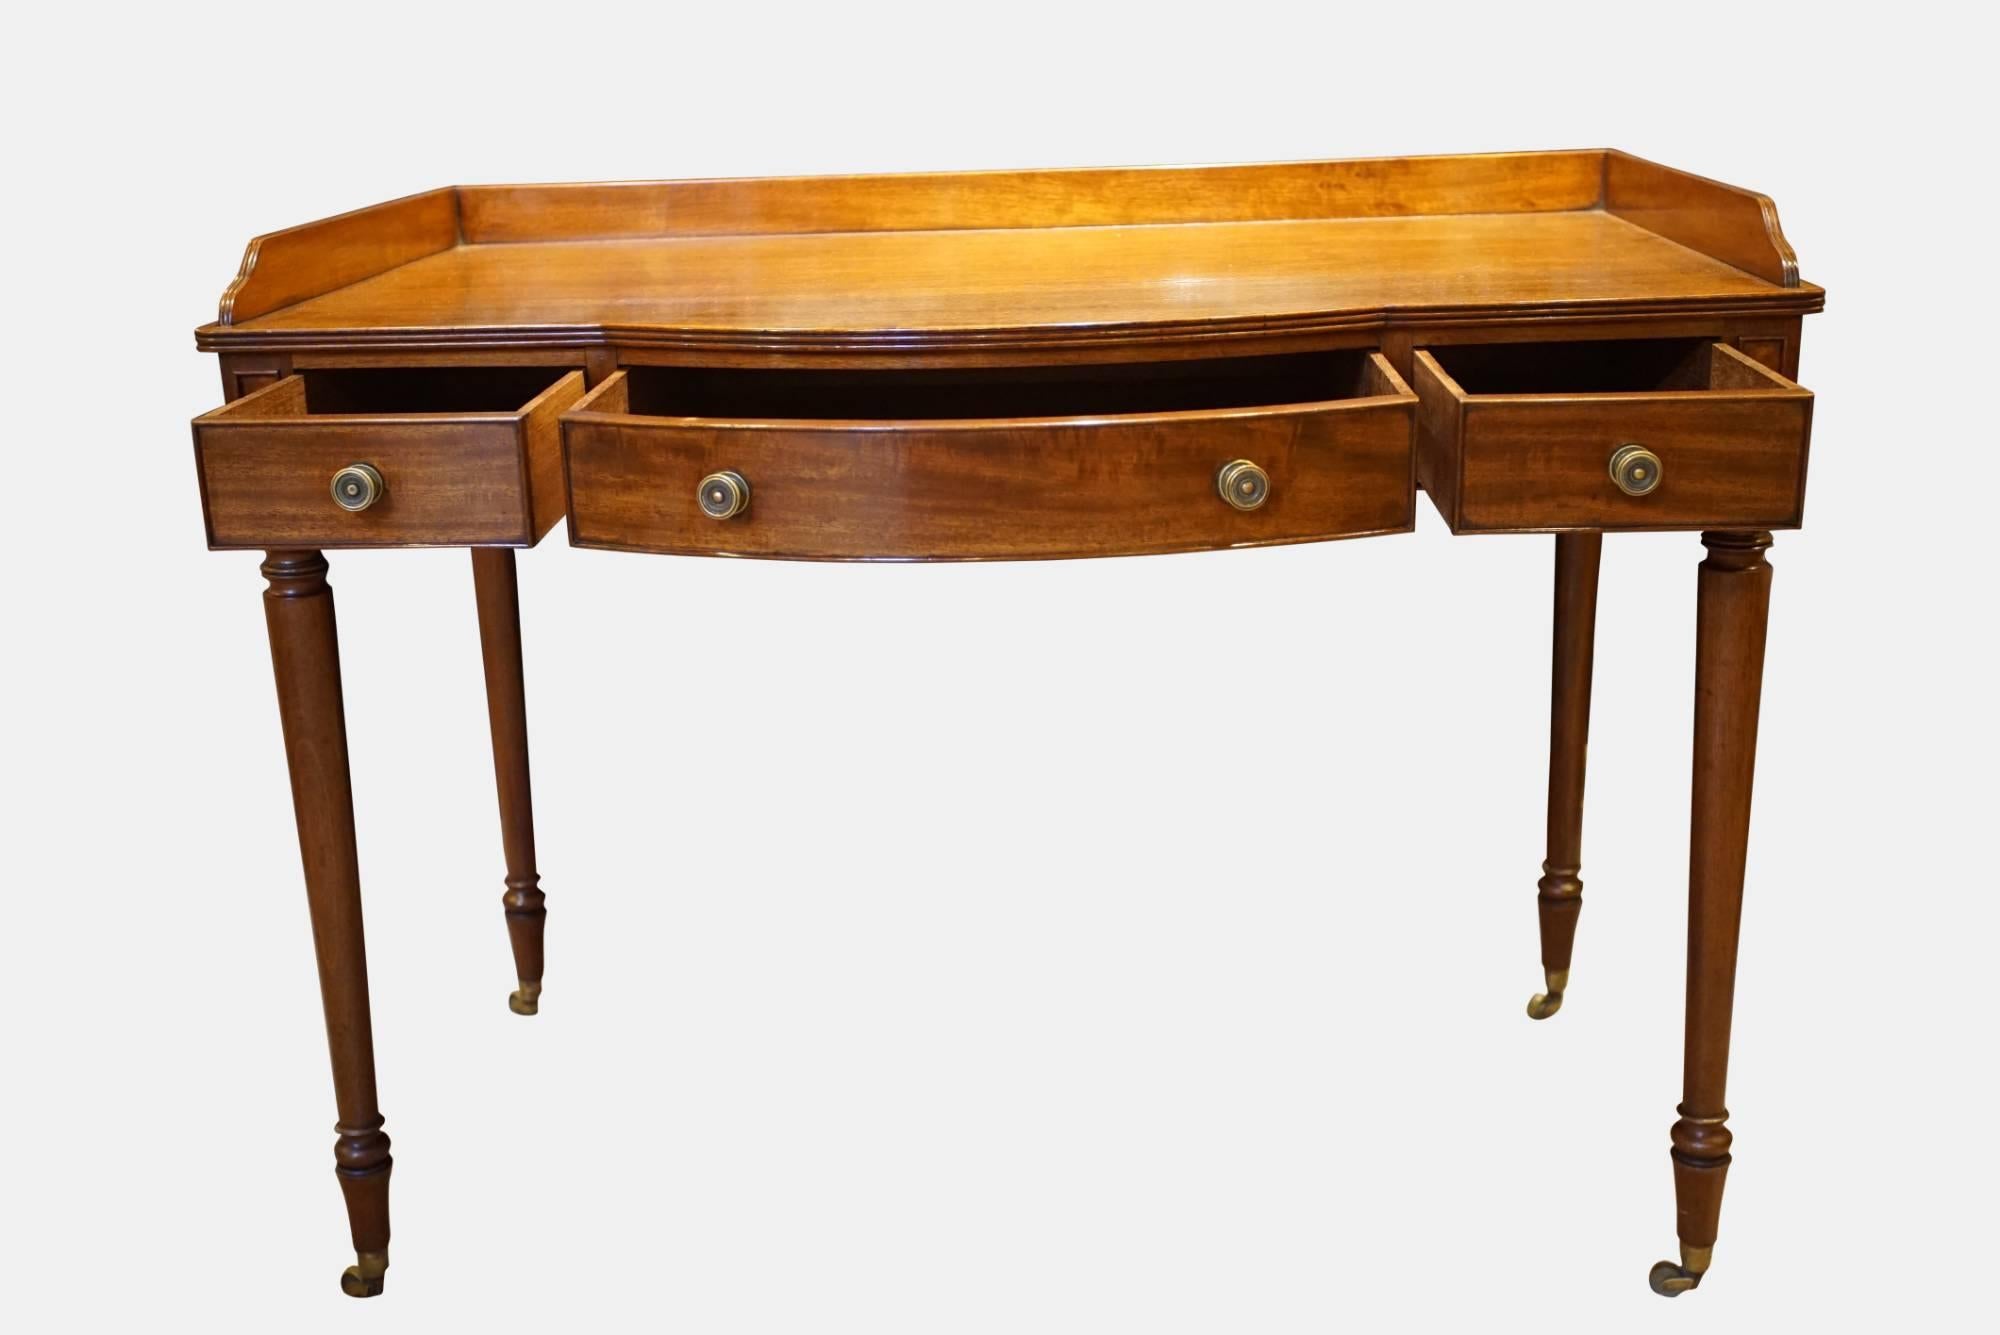 A 3-drawer mahogany side table with bow-fronted central drawer standing on finely turned legs, attributed to Gillows of Lancaster,

circa 1820.